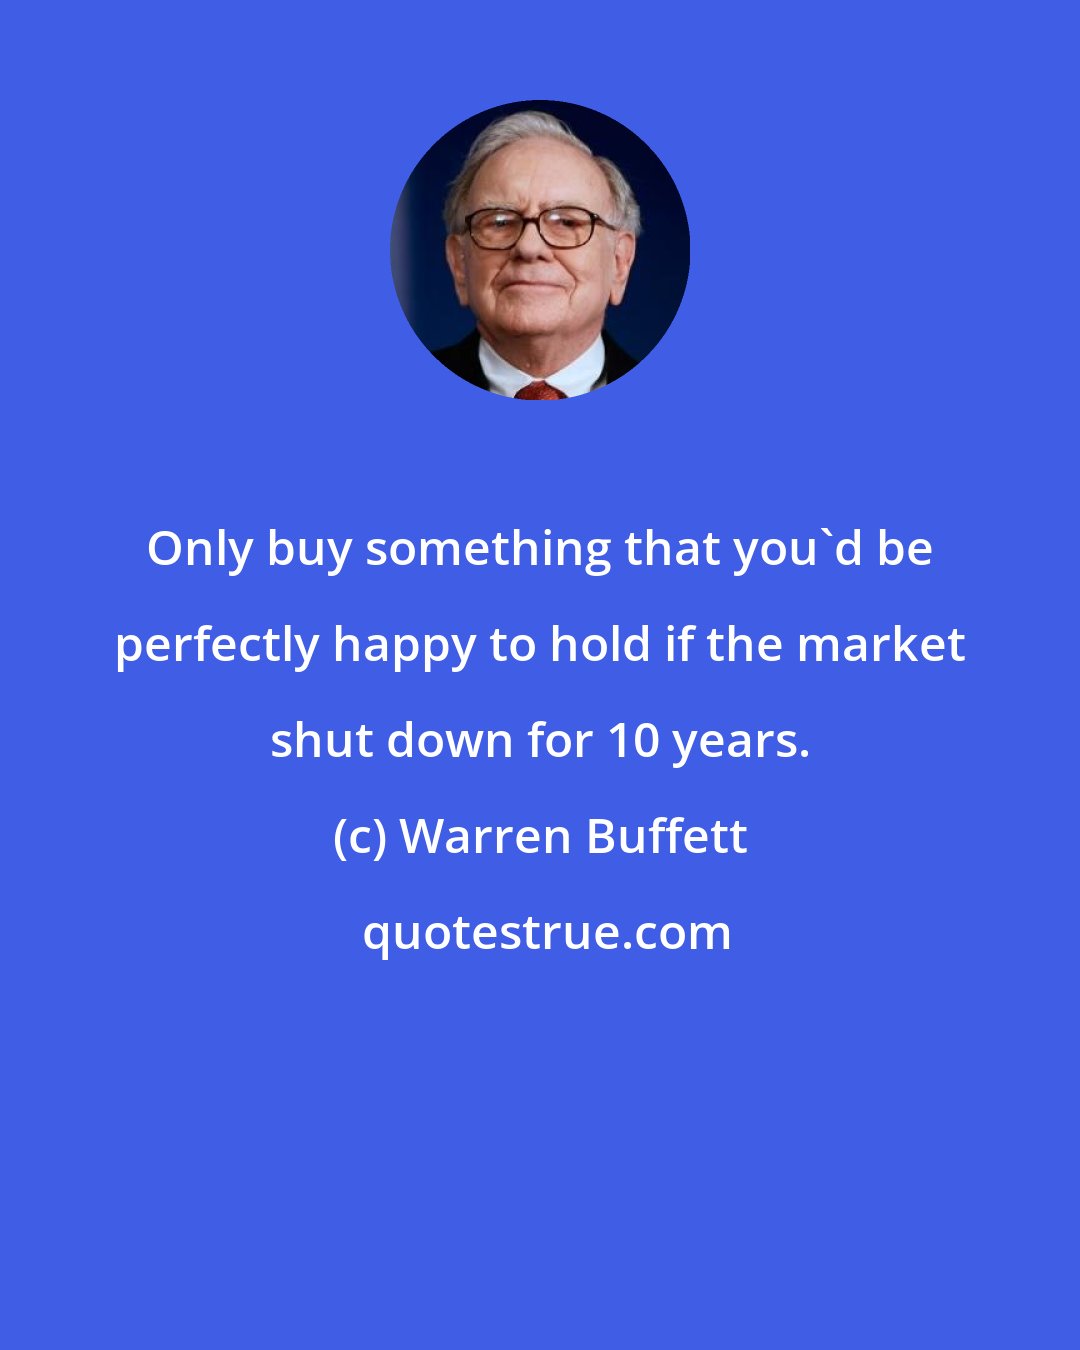 Warren Buffett: Only buy something that you'd be perfectly happy to hold if the market shut down for 10 years.